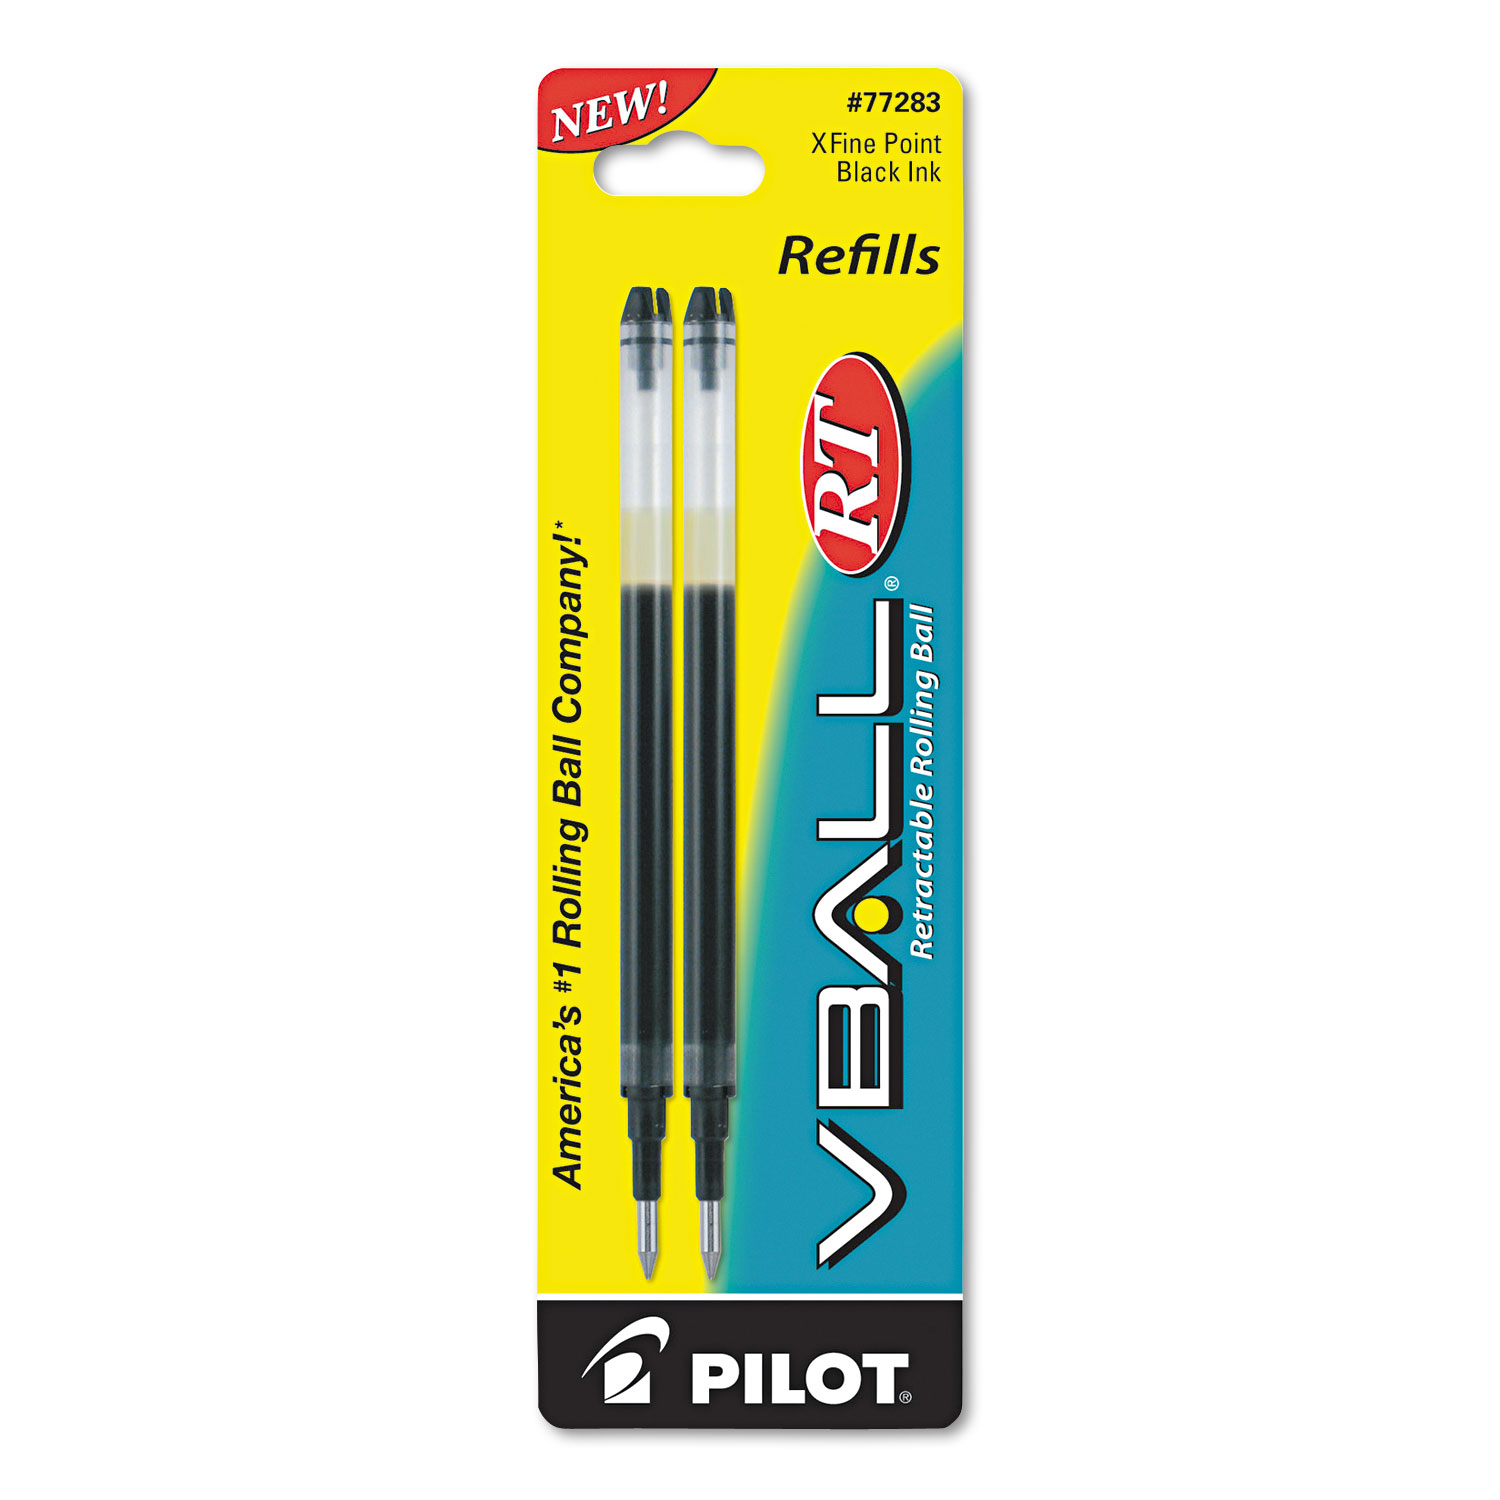  Pilot 77283 Refill for Pilot VBall and VBall RT Rolling Ball Pens, Extra-Fine Point, Black Ink, 2/Pack (PIL77283) 